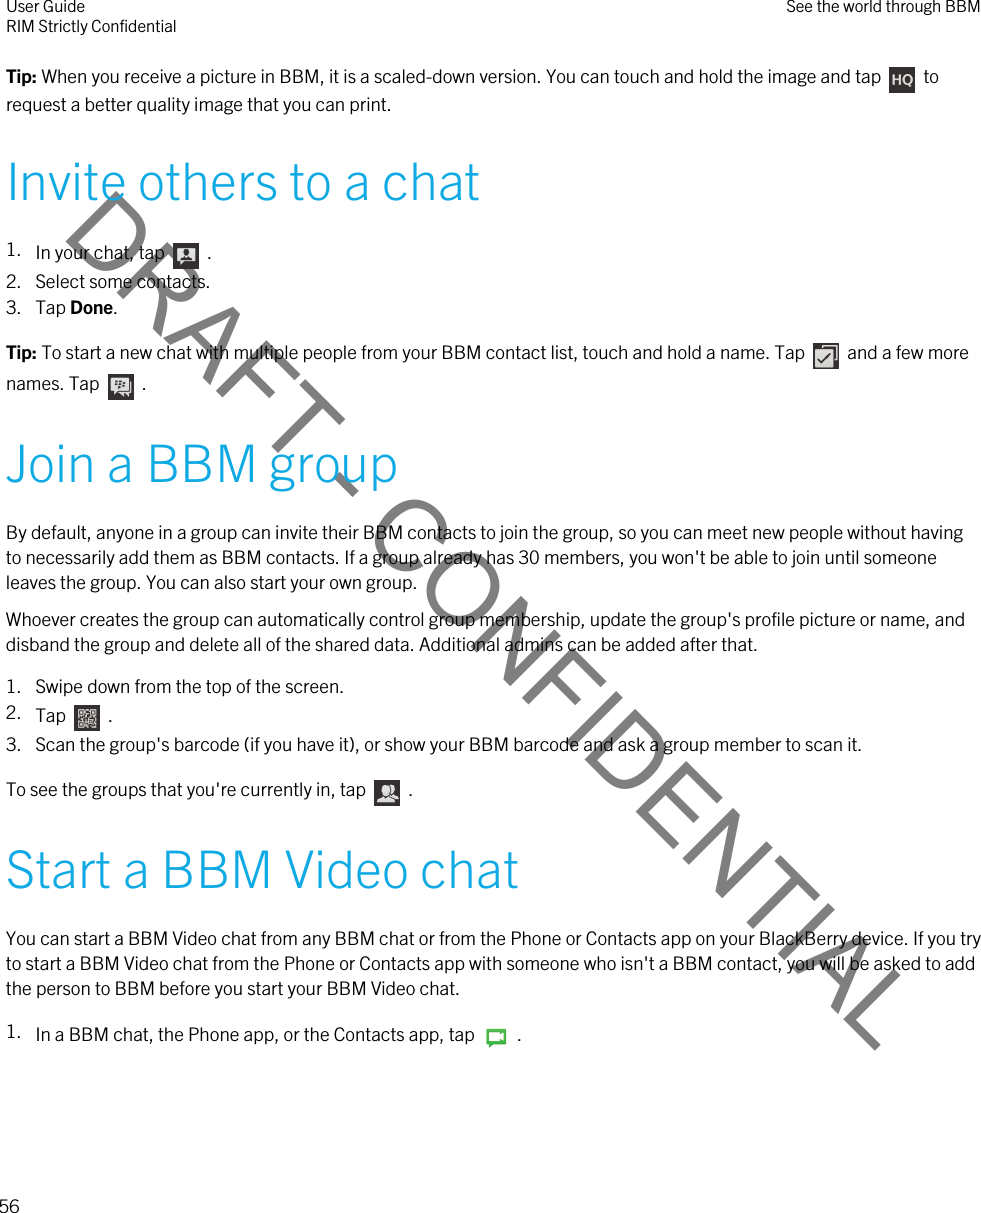 DRAFT - CONFIDENTIALTip: When you receive a picture in BBM, it is a scaled-down version. You can touch and hold the image and tap    to request a better quality image that you can print.Invite others to a chat1. In your chat, tap    . 2. Select some contacts.3. Tap Done.Tip: To start a new chat with multiple people from your BBM contact list, touch and hold a name. Tap    and a few more names. Tap    .Join a BBM groupBy default, anyone in a group can invite their BBM contacts to join the group, so you can meet new people without having to necessarily add them as BBM contacts. If a group already has 30 members, you won&apos;t be able to join until someone leaves the group. You can also start your own group.Whoever creates the group can automatically control group membership, update the group&apos;s profile picture or name, and disband the group and delete all of the shared data. Additional admins can be added after that.1. Swipe down from the top of the screen.2. Tap    .3. Scan the group&apos;s barcode (if you have it), or show your BBM barcode and ask a group member to scan it.To see the groups that you&apos;re currently in, tap    .Start a BBM Video chatYou can start a BBM Video chat from any BBM chat or from the Phone or Contacts app on your BlackBerry device. If you try to start a BBM Video chat from the Phone or Contacts app with someone who isn&apos;t a BBM contact, you will be asked to add the person to BBM before you start your BBM Video chat.1. In a BBM chat, the Phone app, or the Contacts app, tap    .User GuideRIM Strictly Confidential See the world through BBM56 